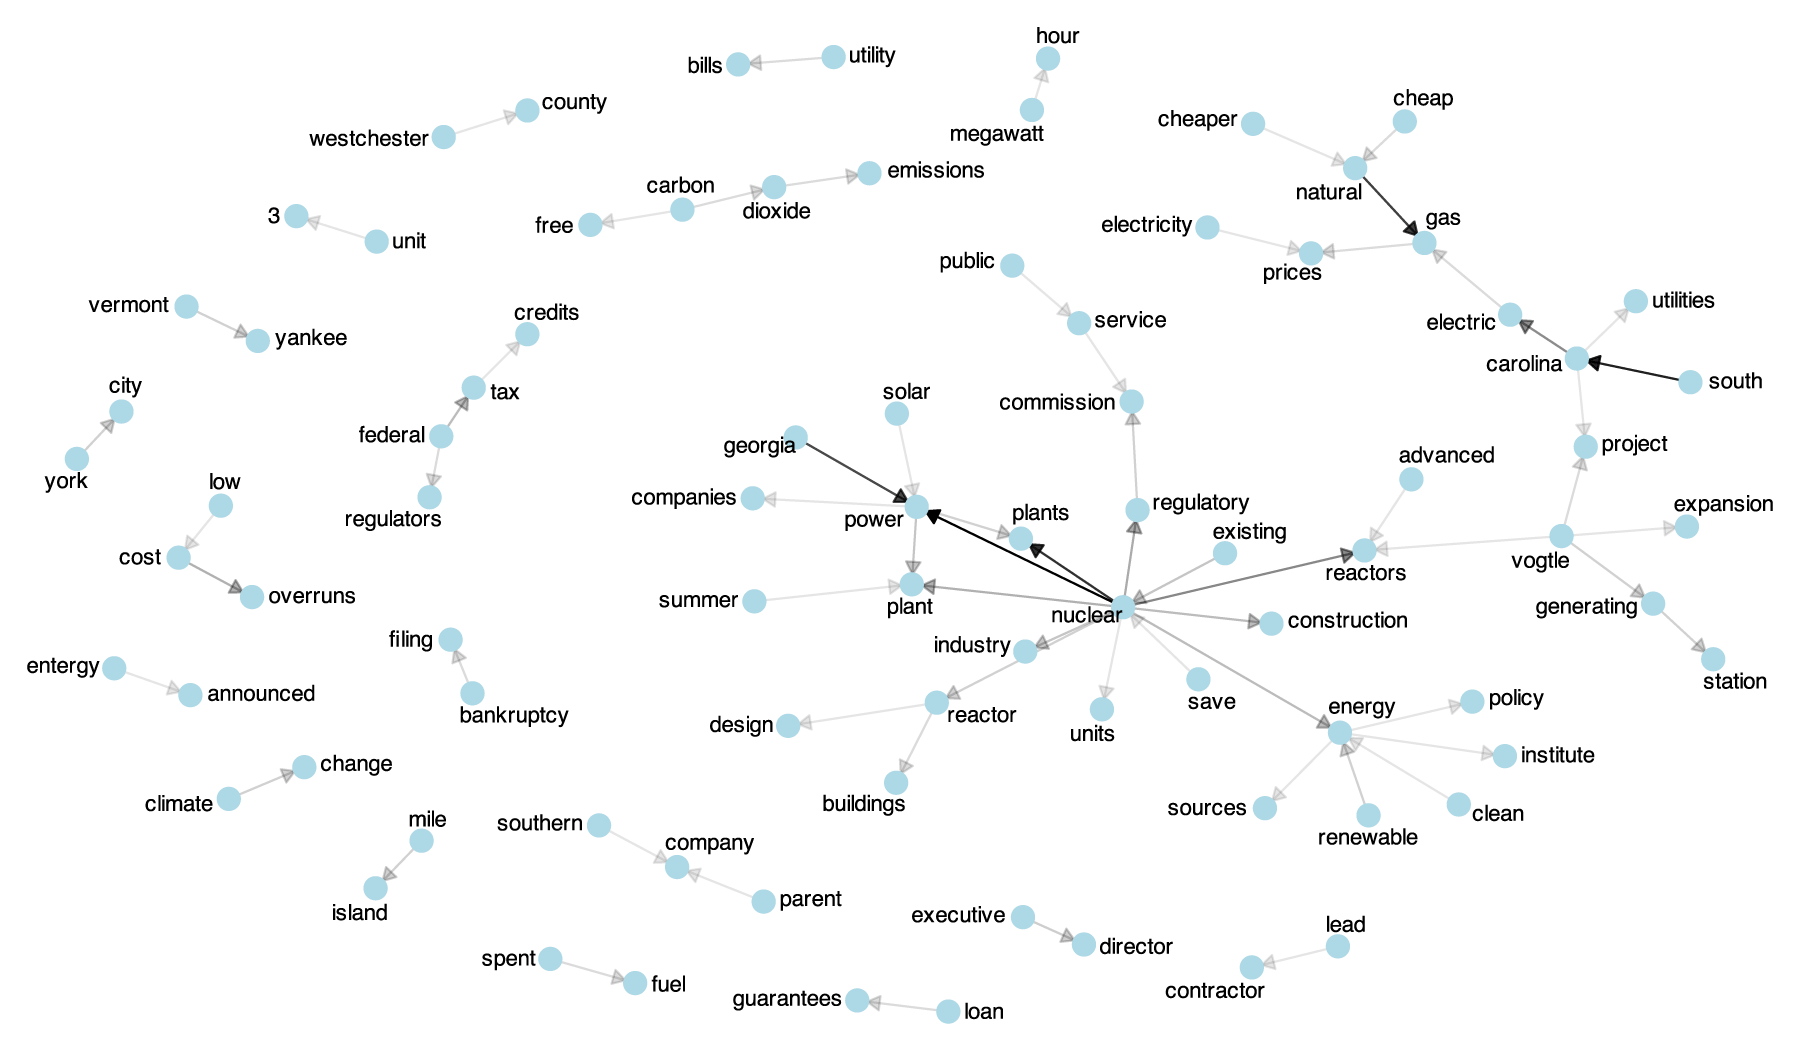 Network map of topics discussed in the news media in 2017